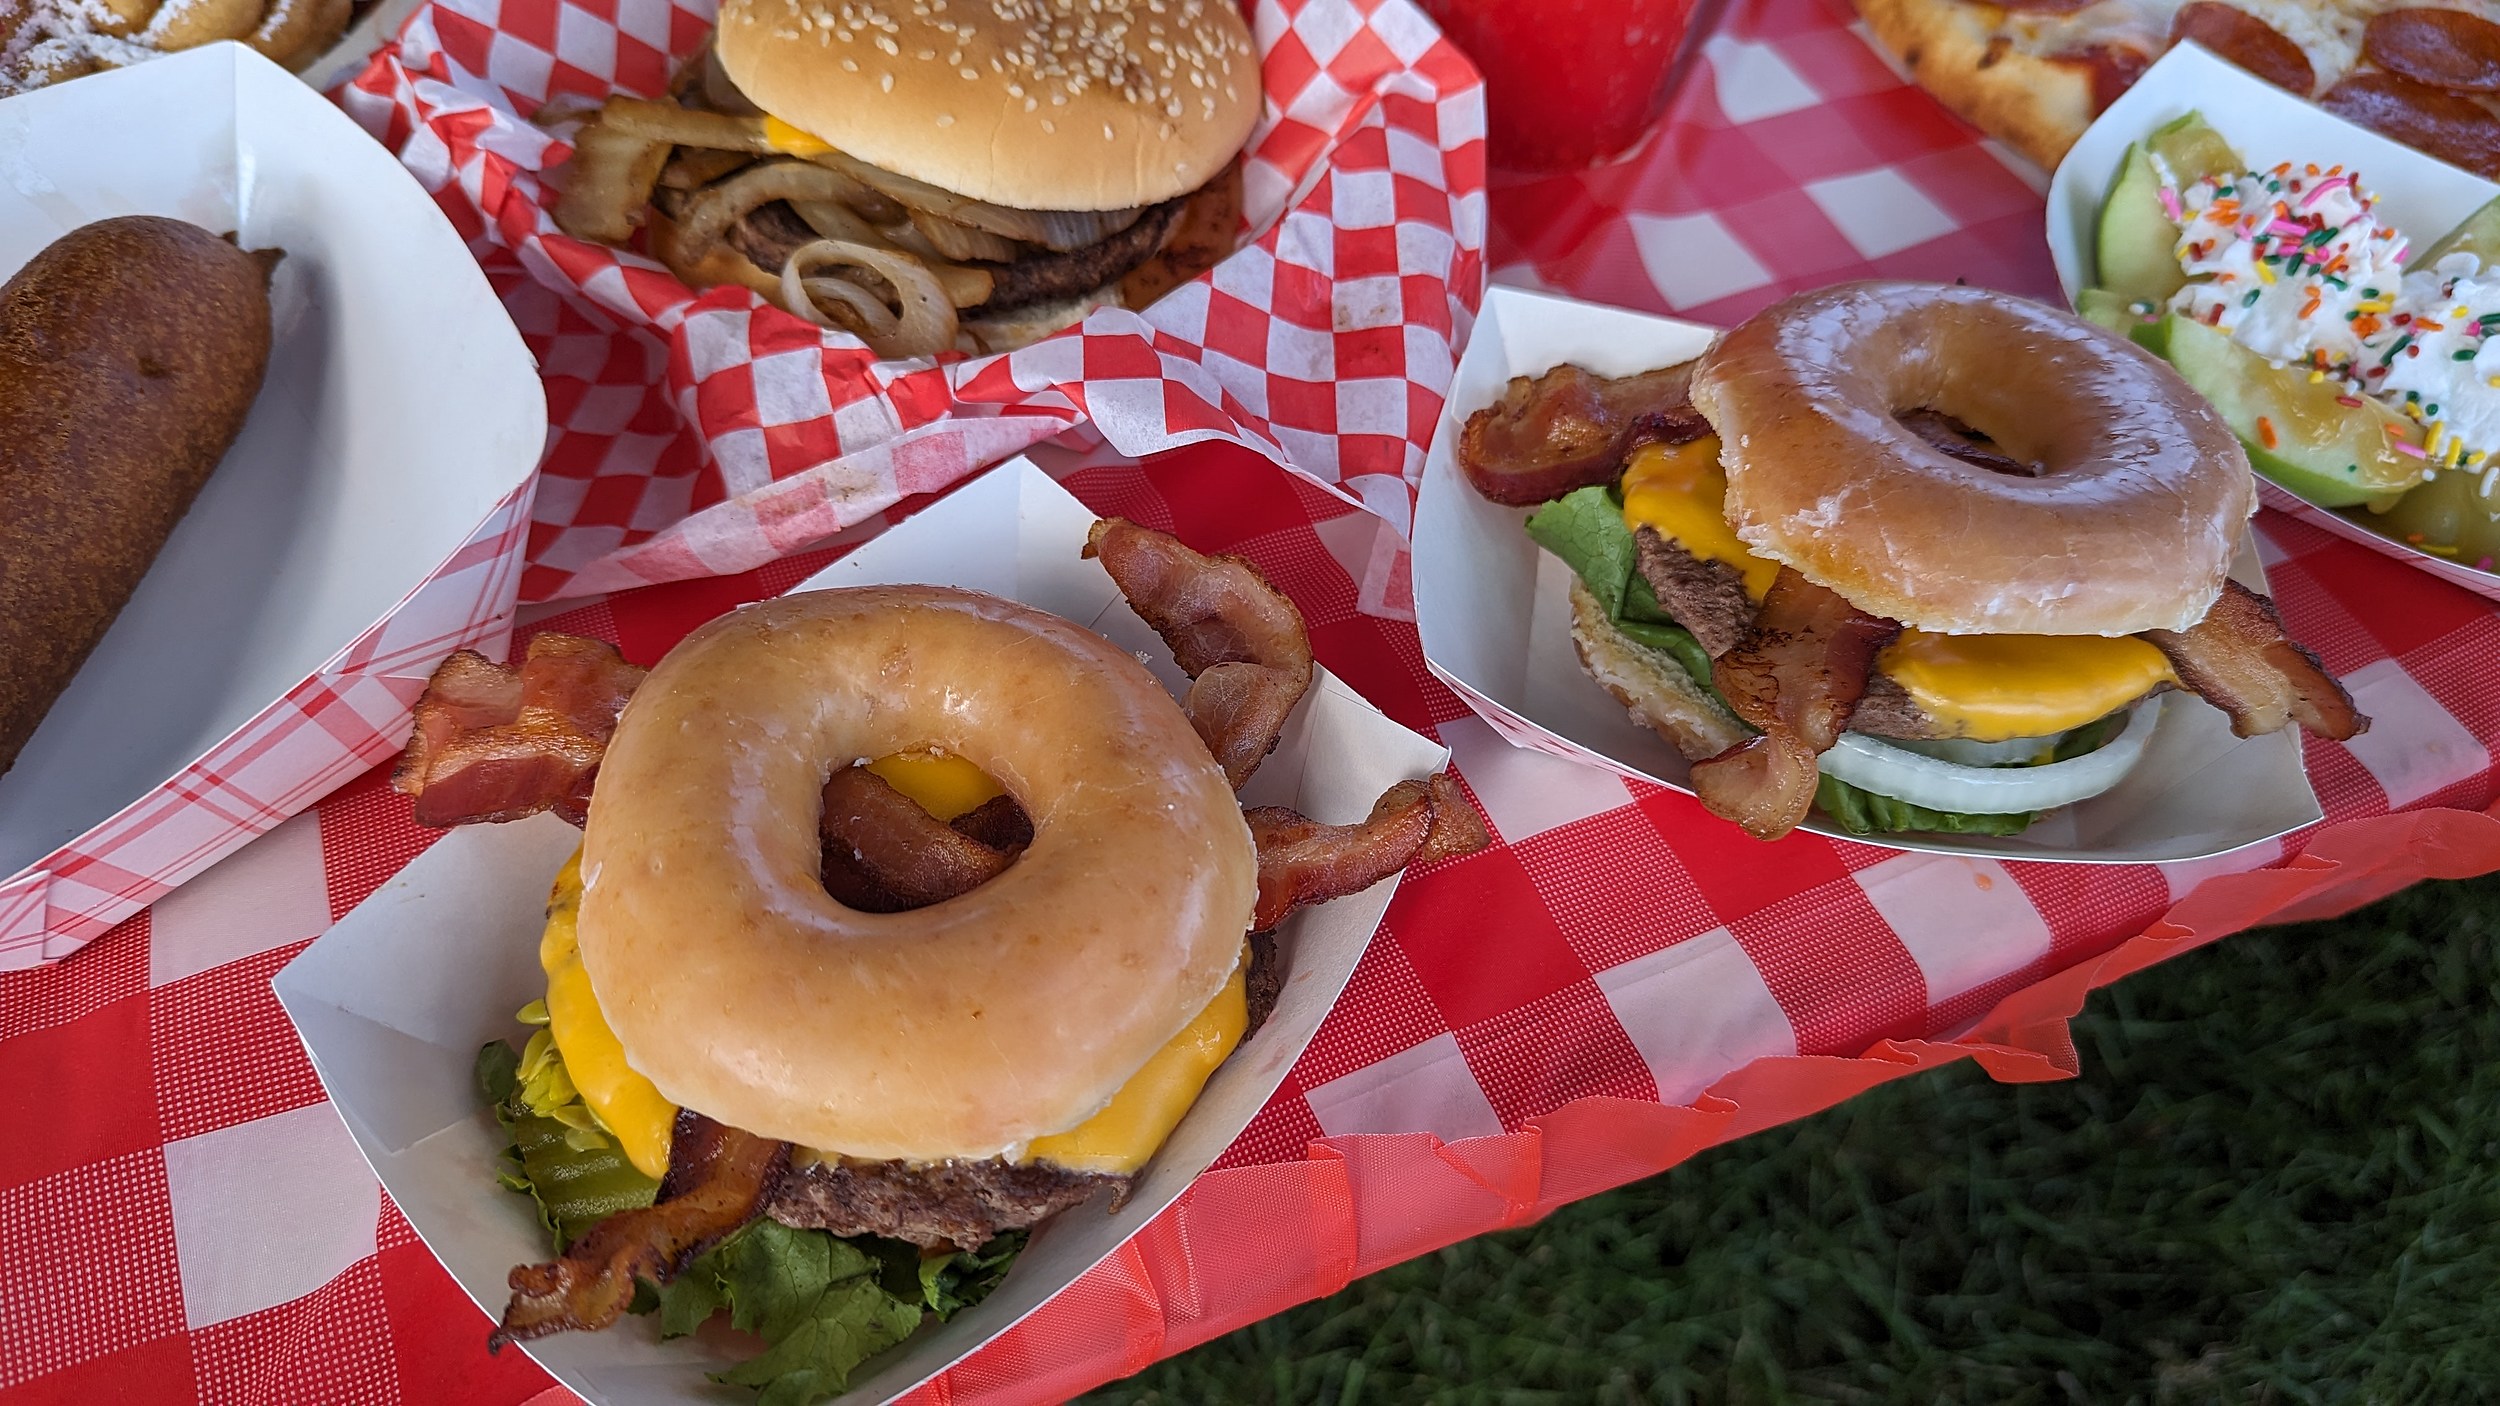 Krispy Kreme Burger, Pickle Pizza Among New Foods at This Years Central Washington State Fair photo